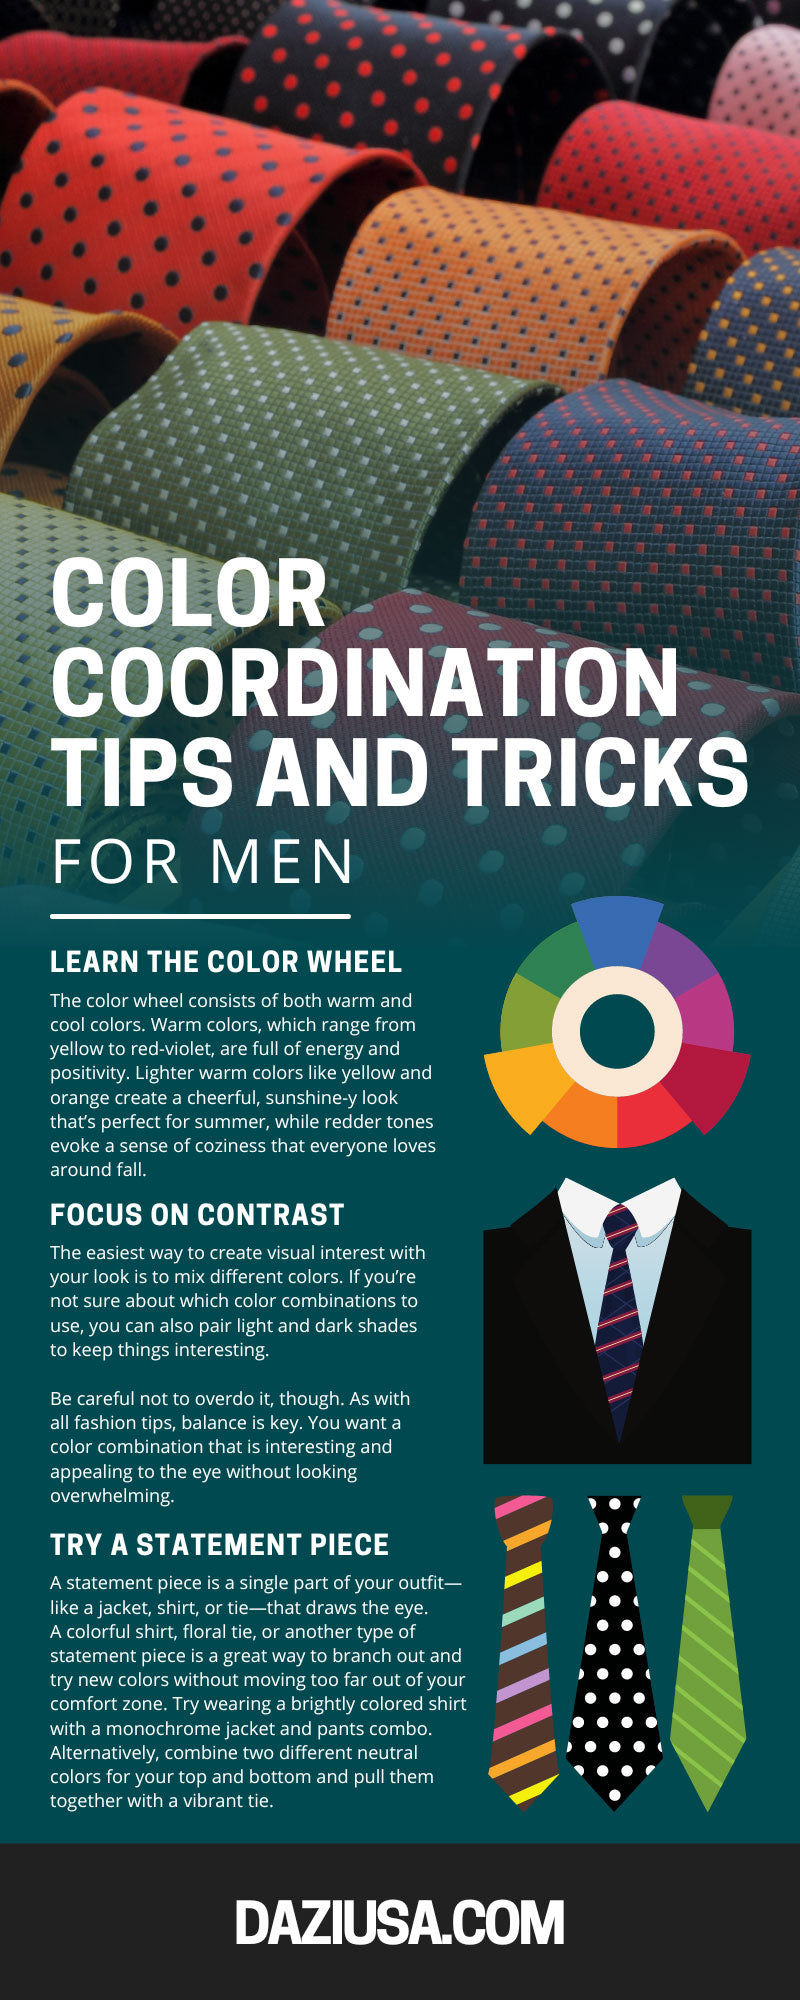 Color Coordination Tips and Tricks for Men